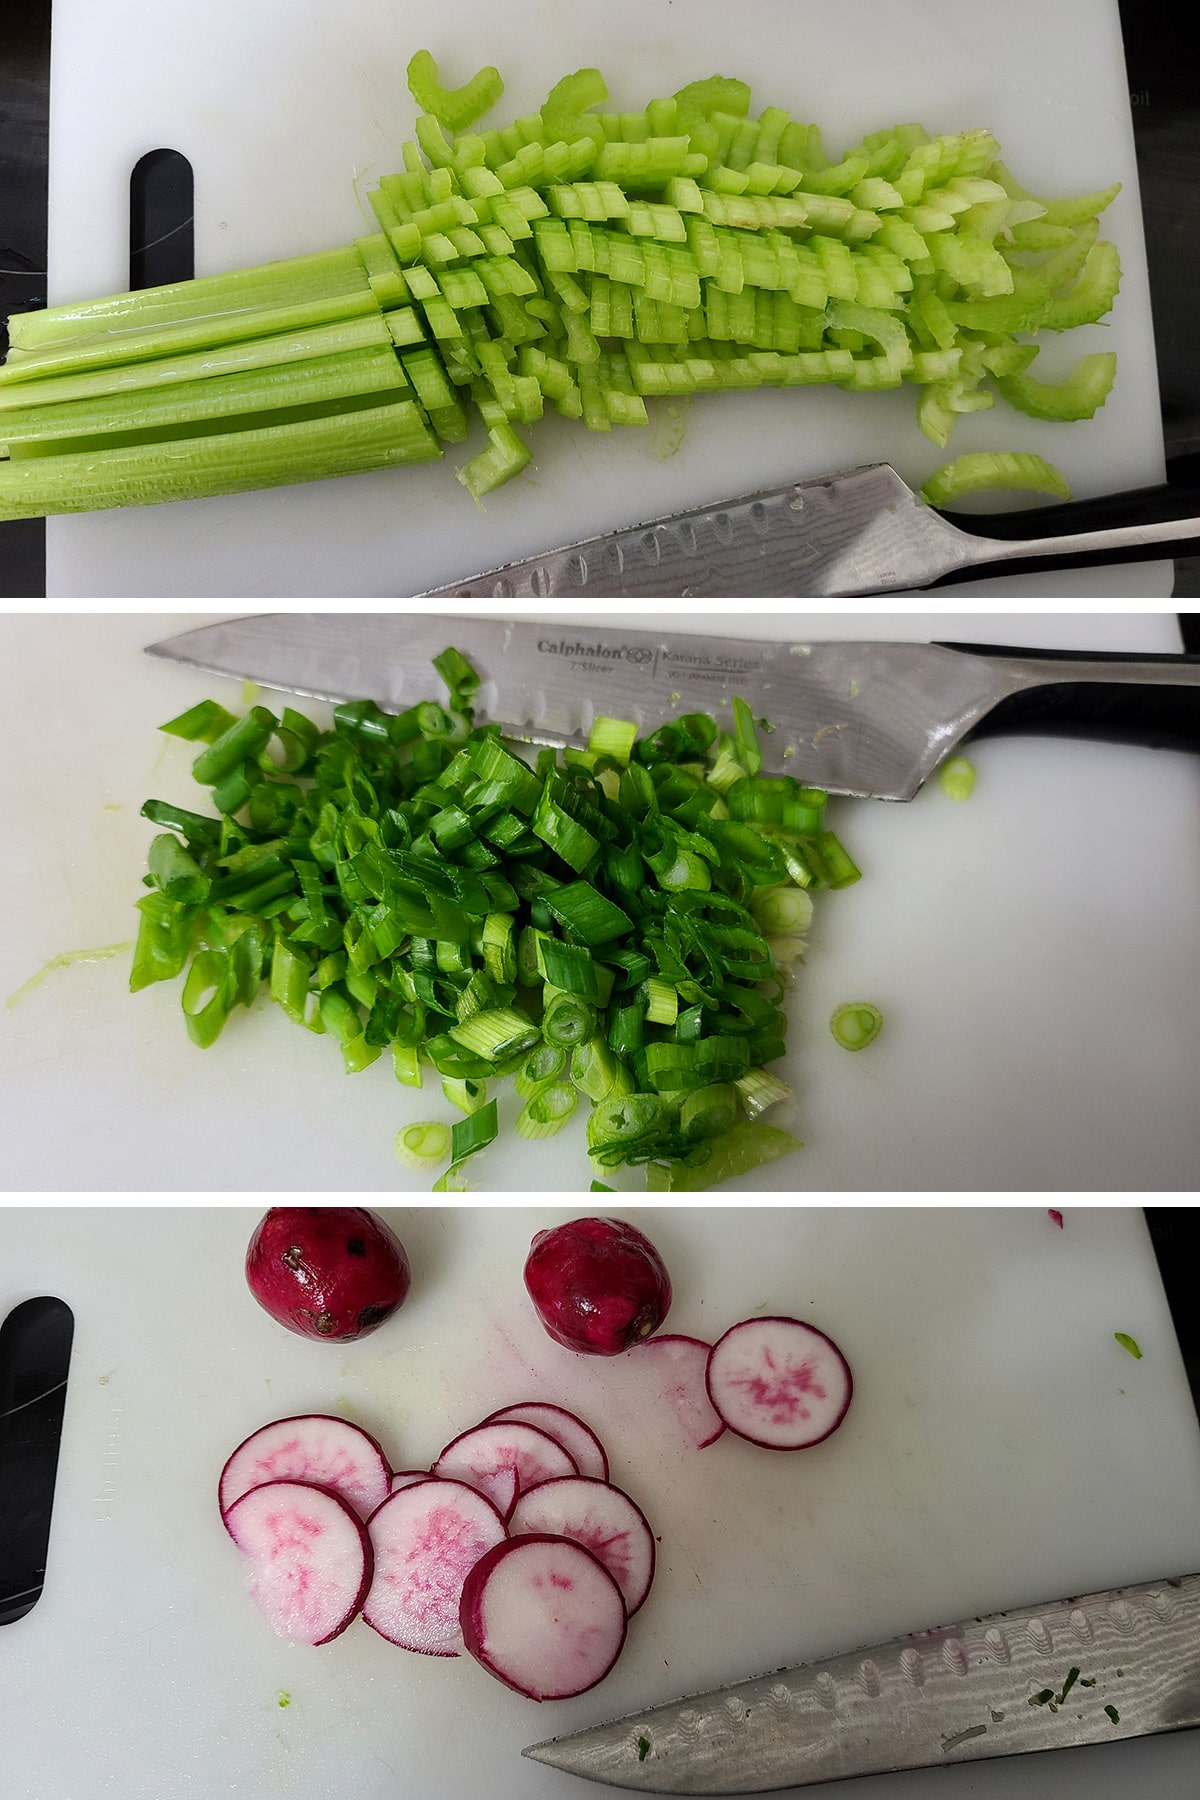 A three part compilation image showing celery bring chopped, chopped green onions, and sliced radishes on a cutting board.